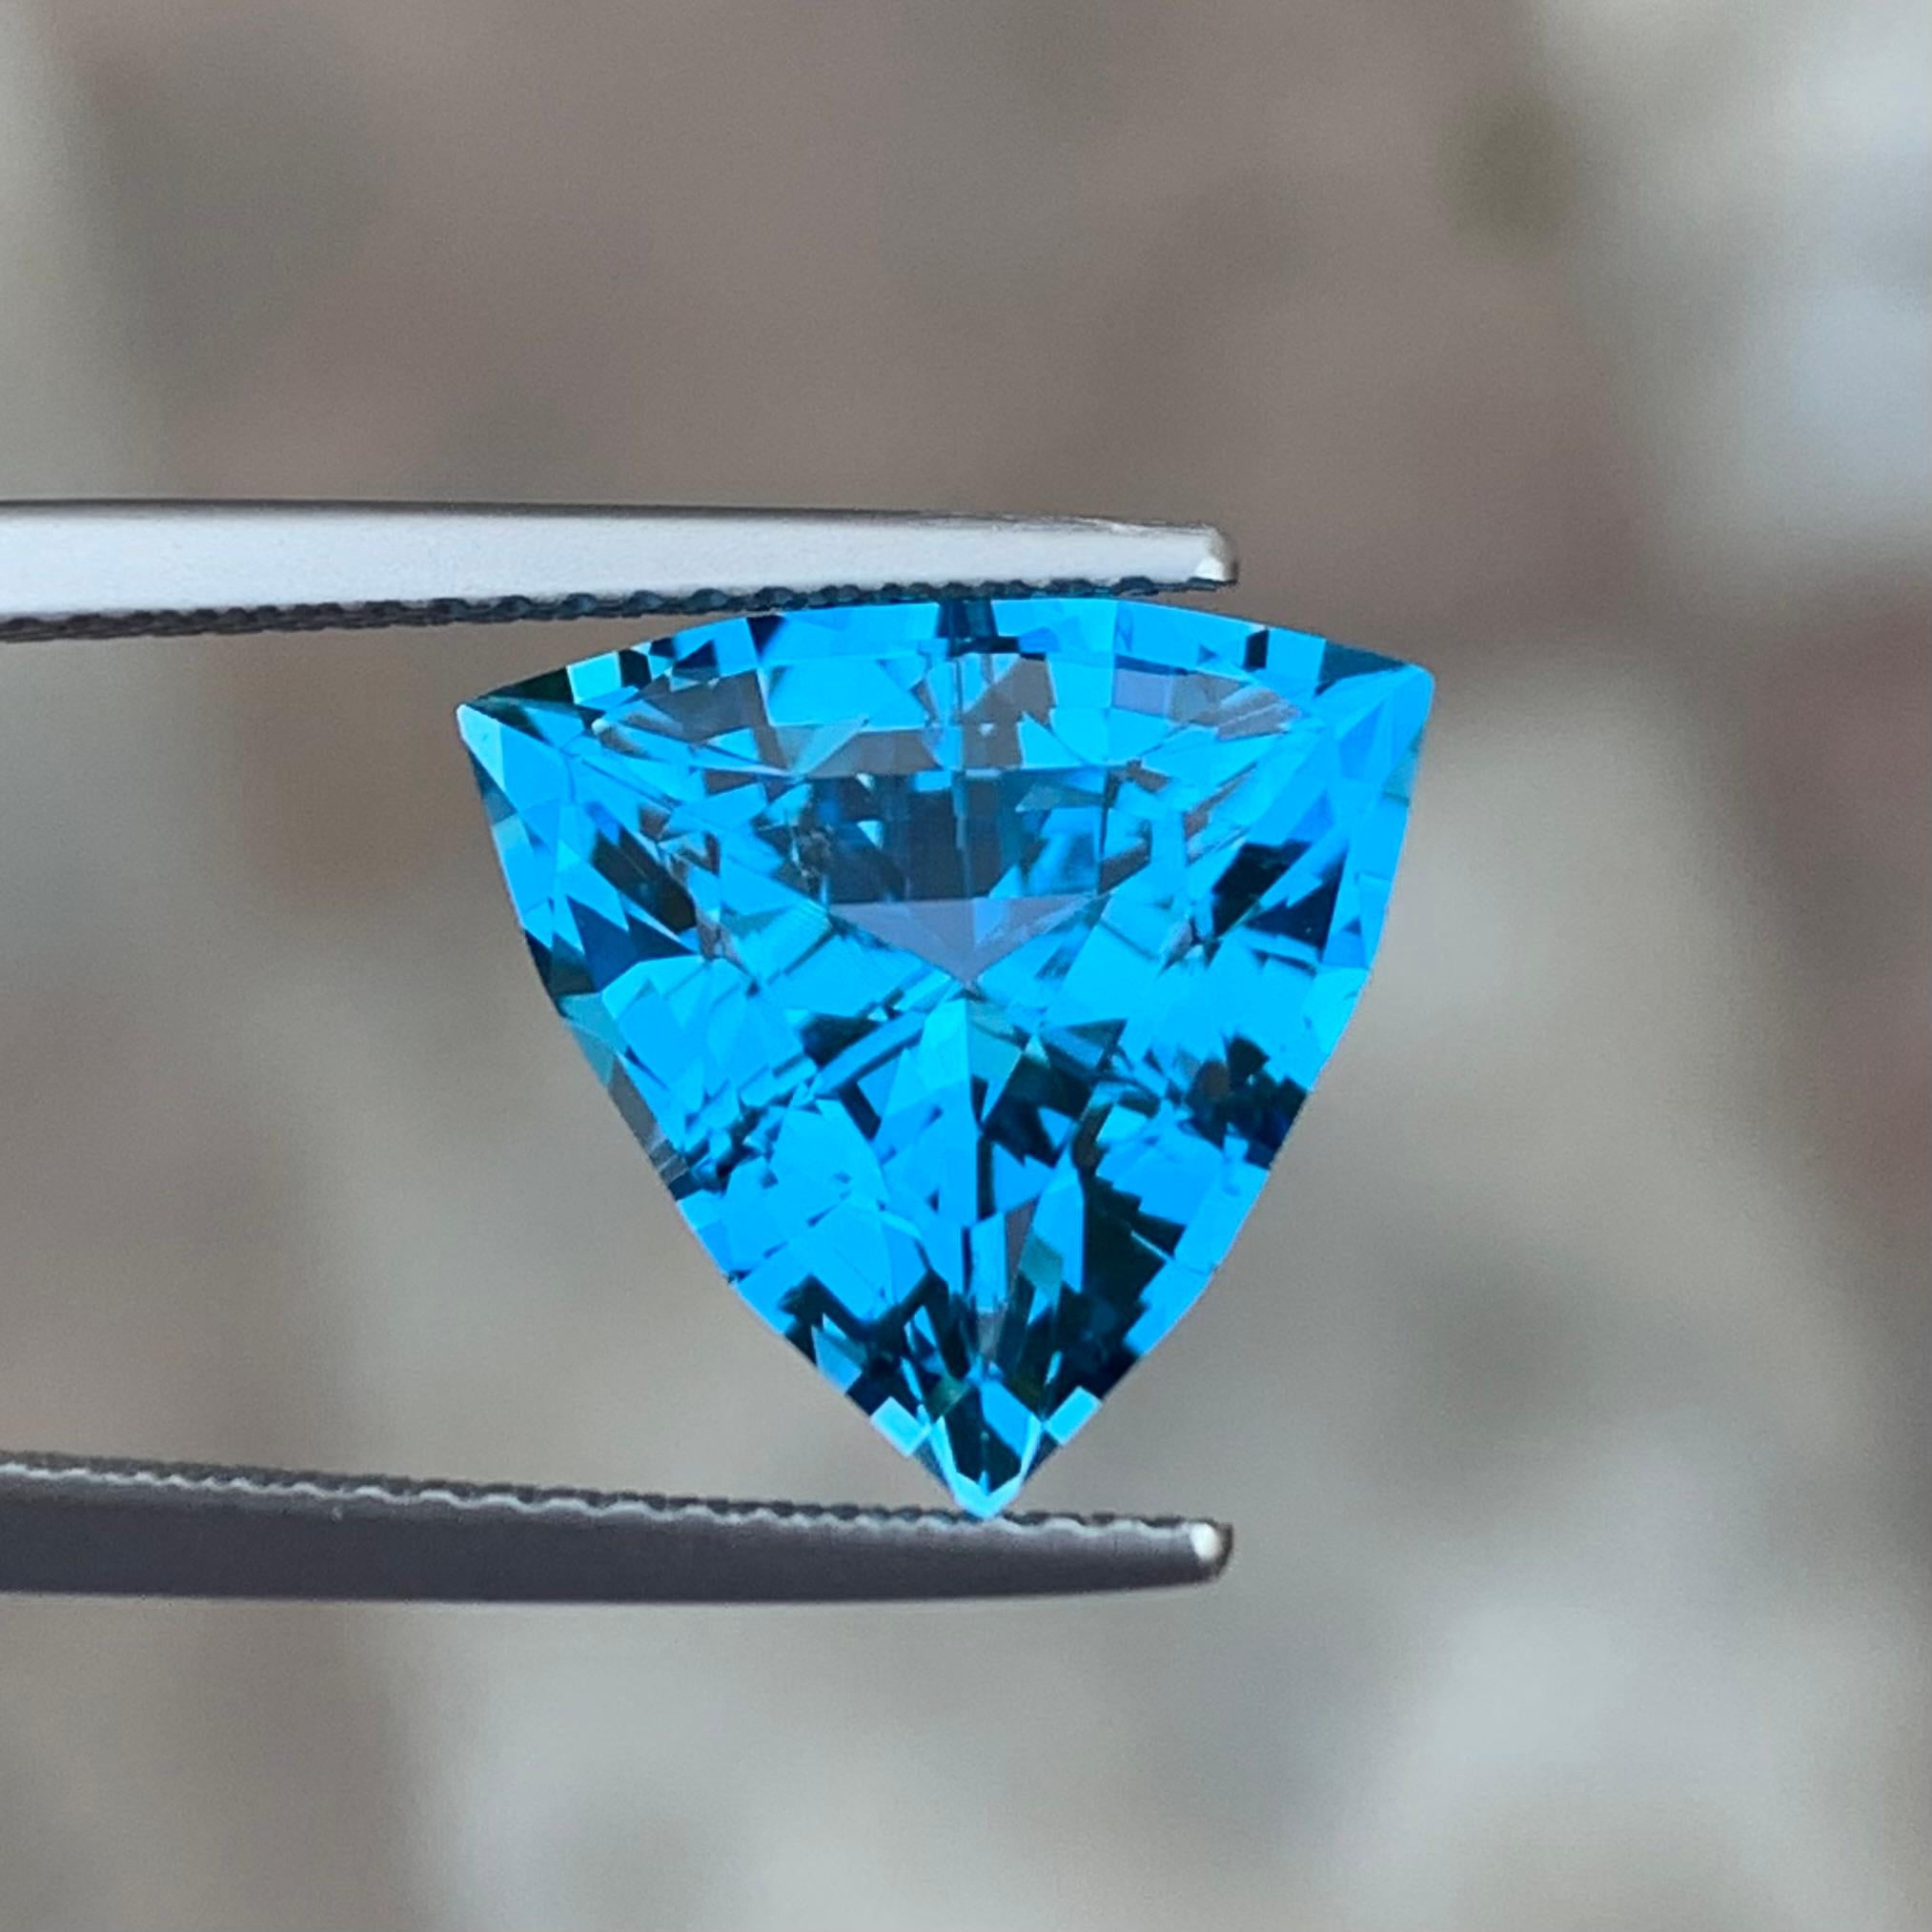 Gemstone Type : Faceted Electric Blue Topaz 
Weight : 7.20 Carats
Dimensions : 12.1x12.6x7.9 Mm
Origin : Brazil
Clarity : Eye Clean
Shape: Trillion
Color: Blue
Certificate: On Demand
Blue Topaz Metaphysical Properties
Blue topaz, in particular, is